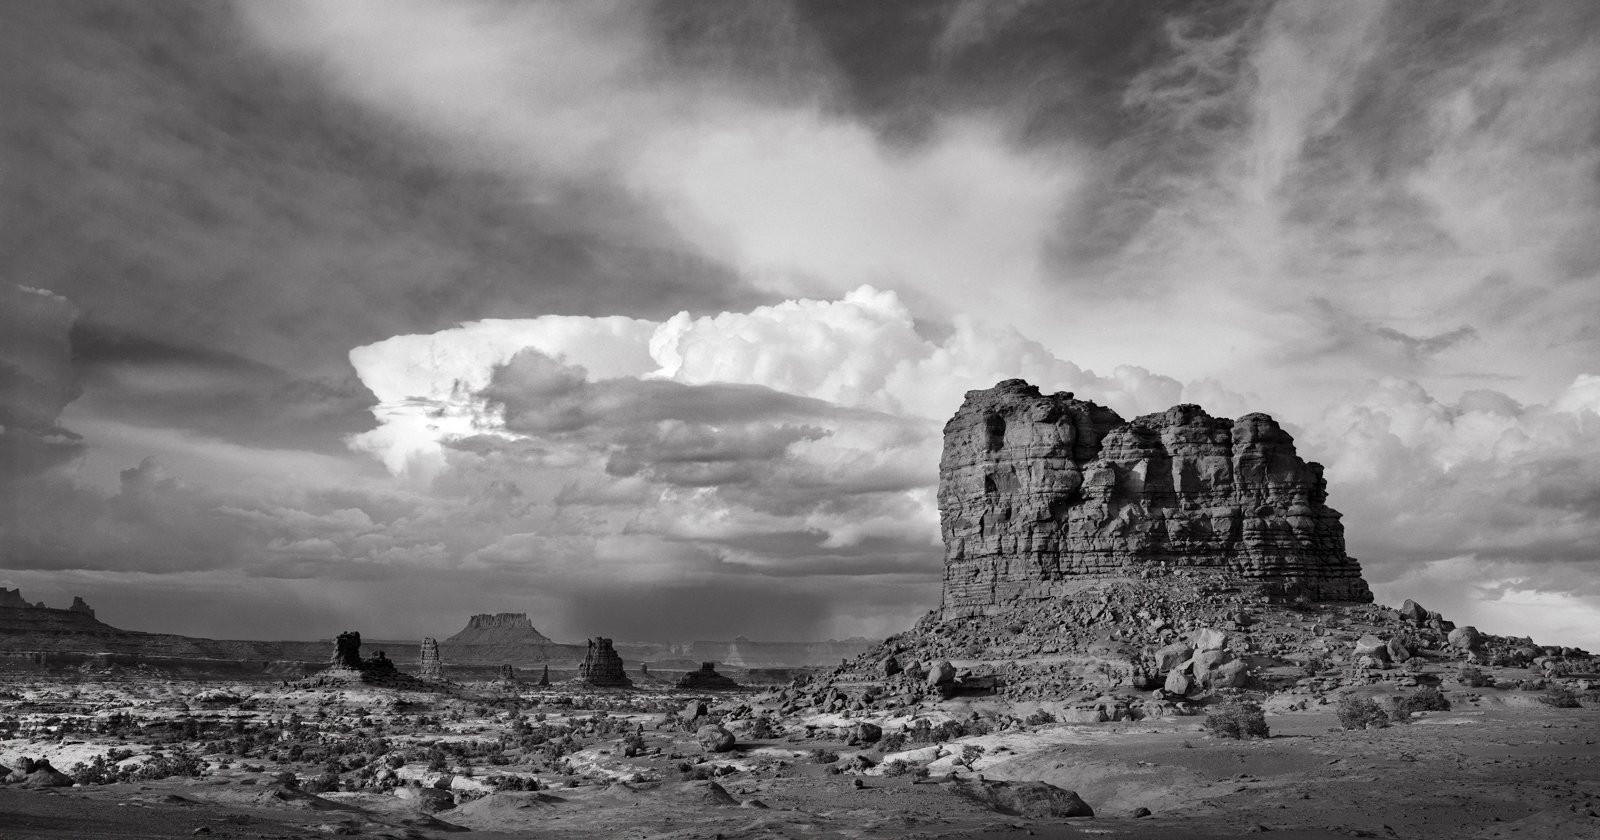 Canyonlands National Park in 1988